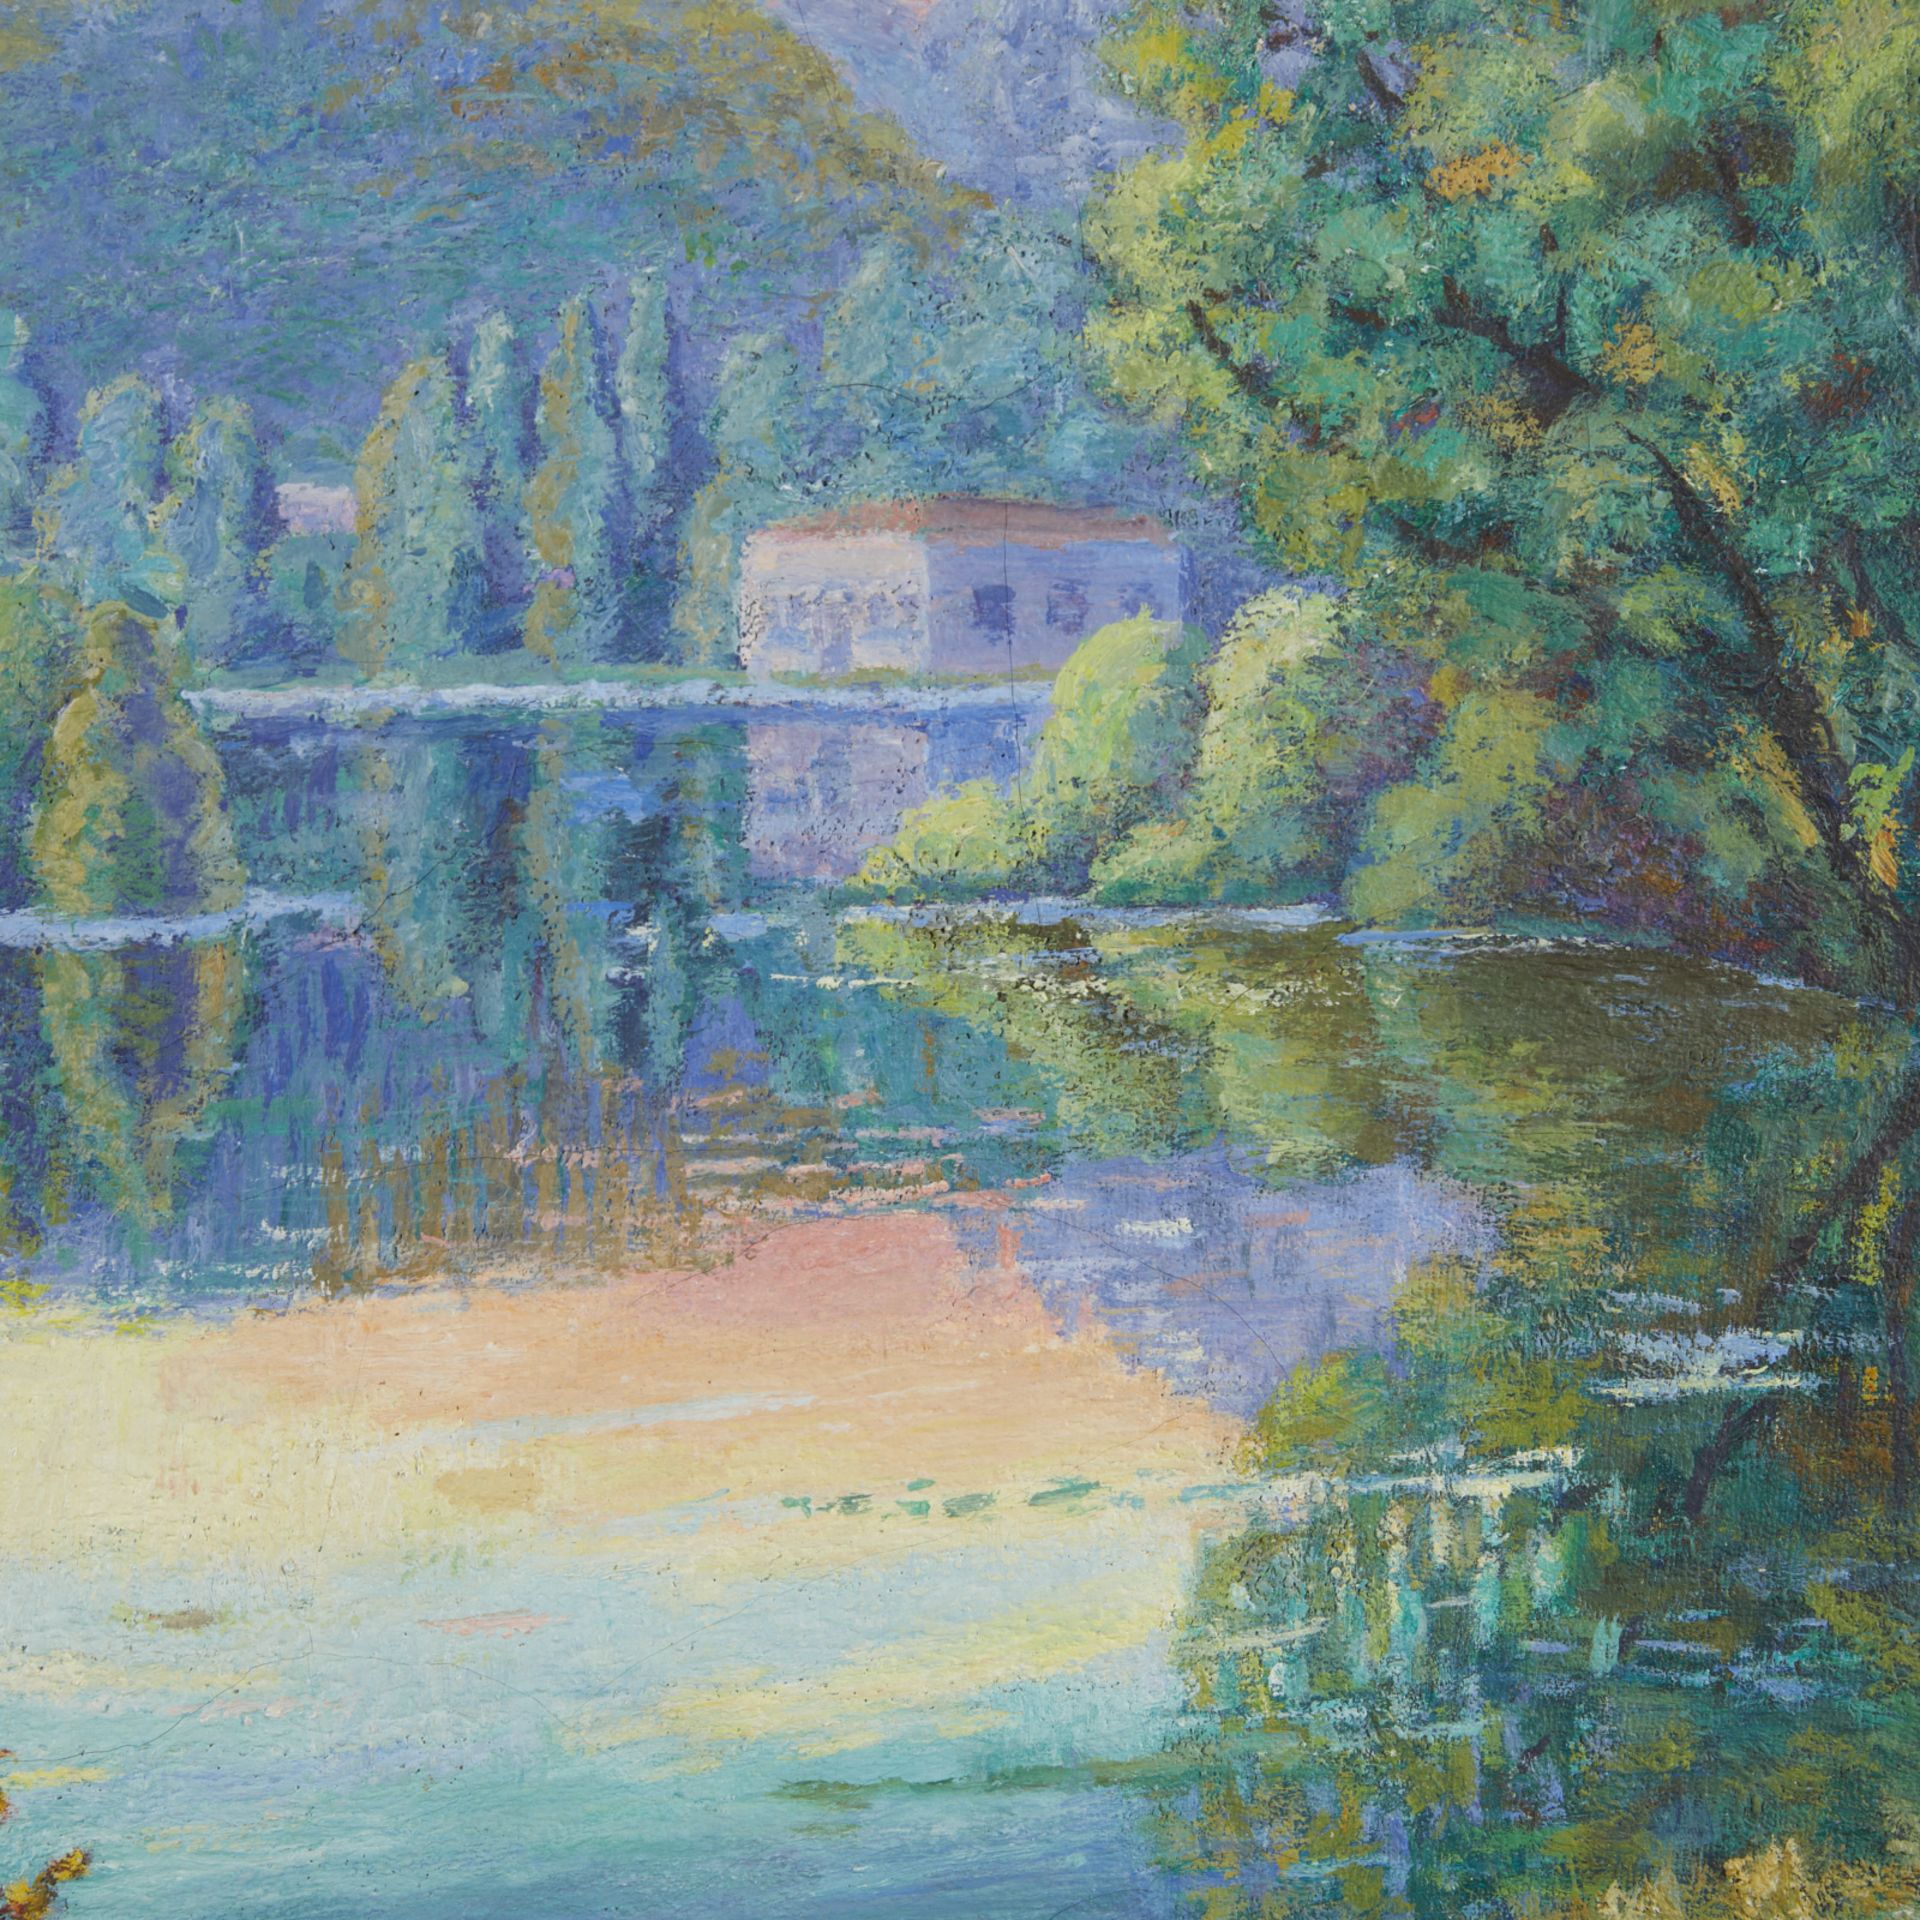 Mildred Poissant "Sundown on the River" Painting - Image 5 of 7